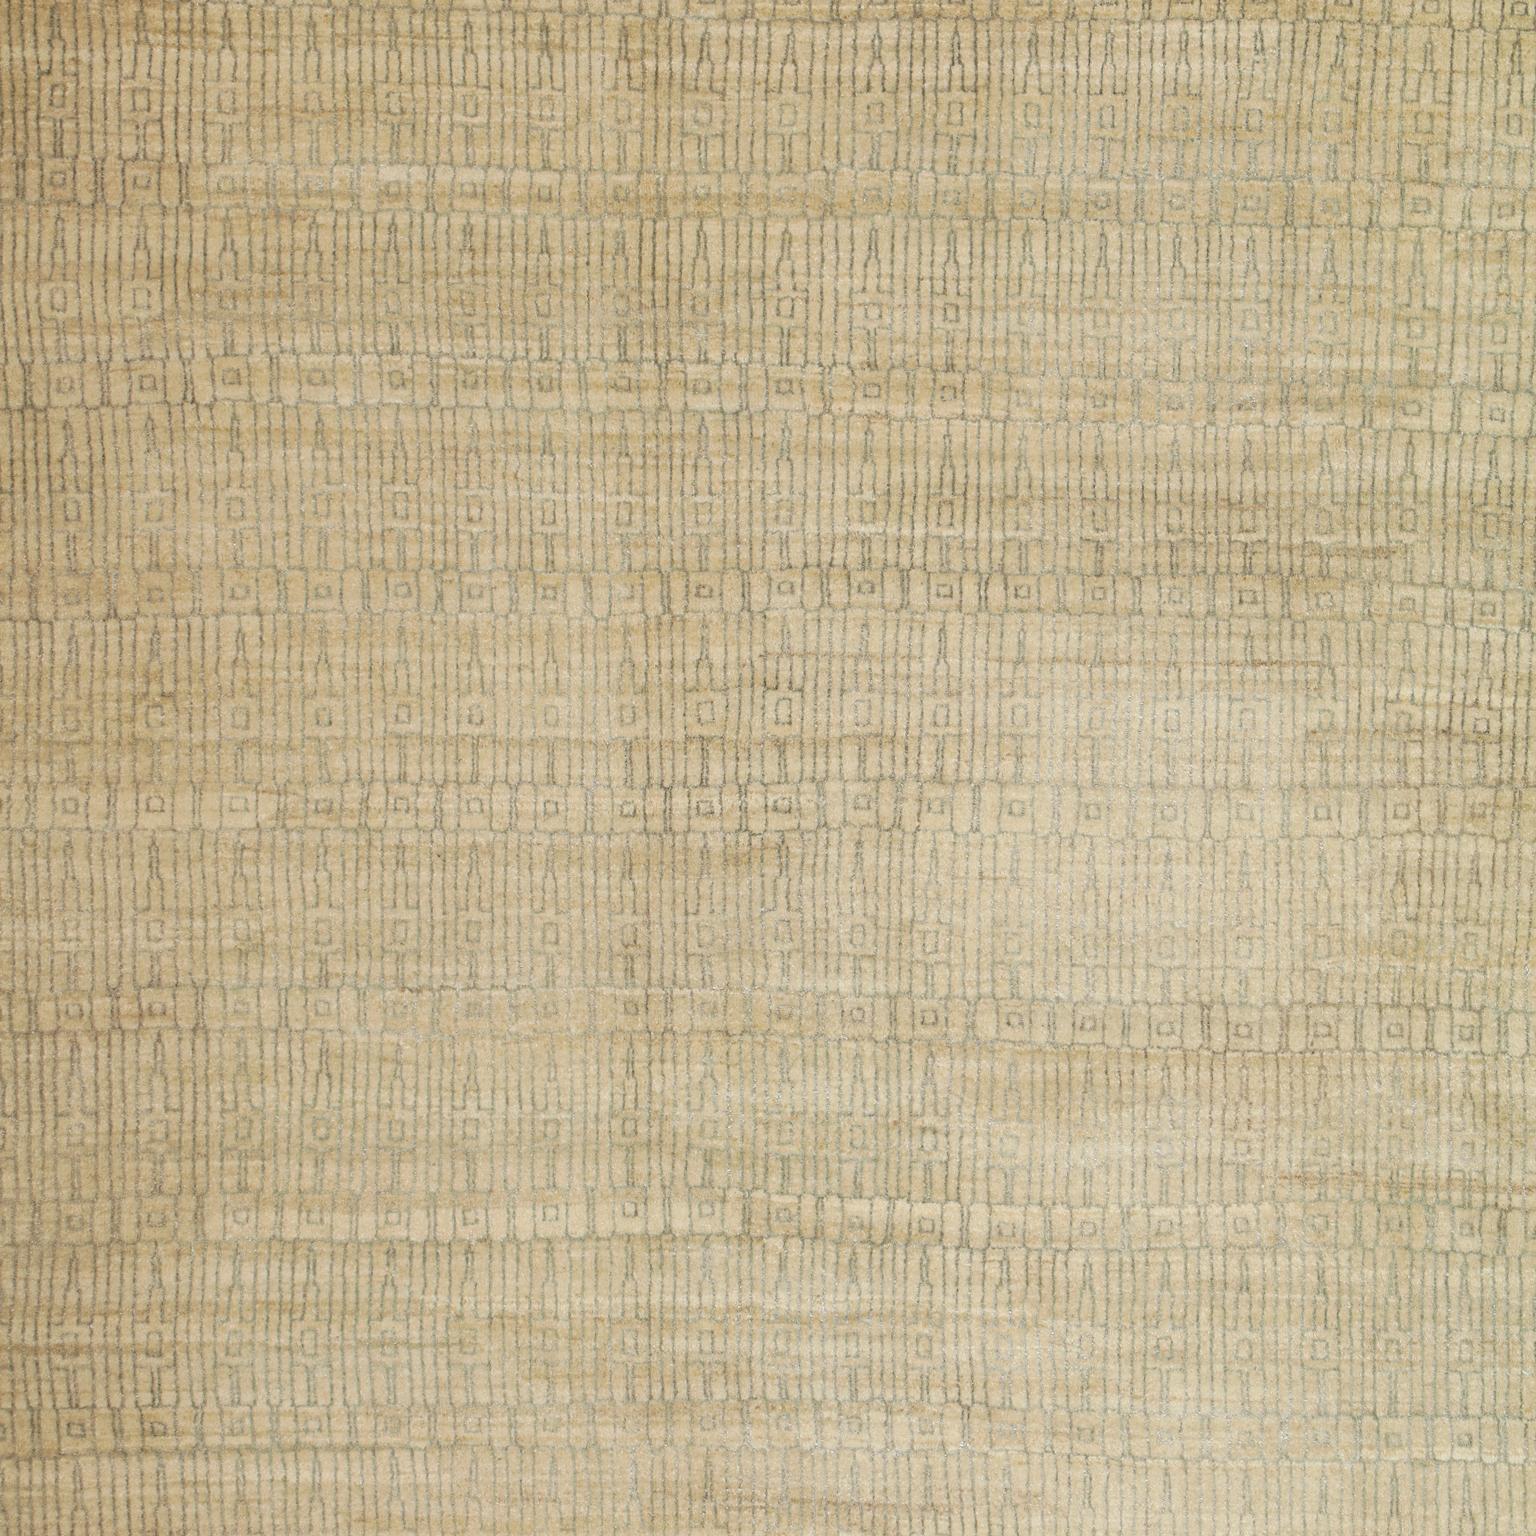 Ultra-detailed with a soft light-gray silk design and a subdued cream background, this contemporary wool and silk Excelsior carpet is hand-knotted and belongs to the Orley Shabahang Architectural collection. The intricate and repetitive small-scale